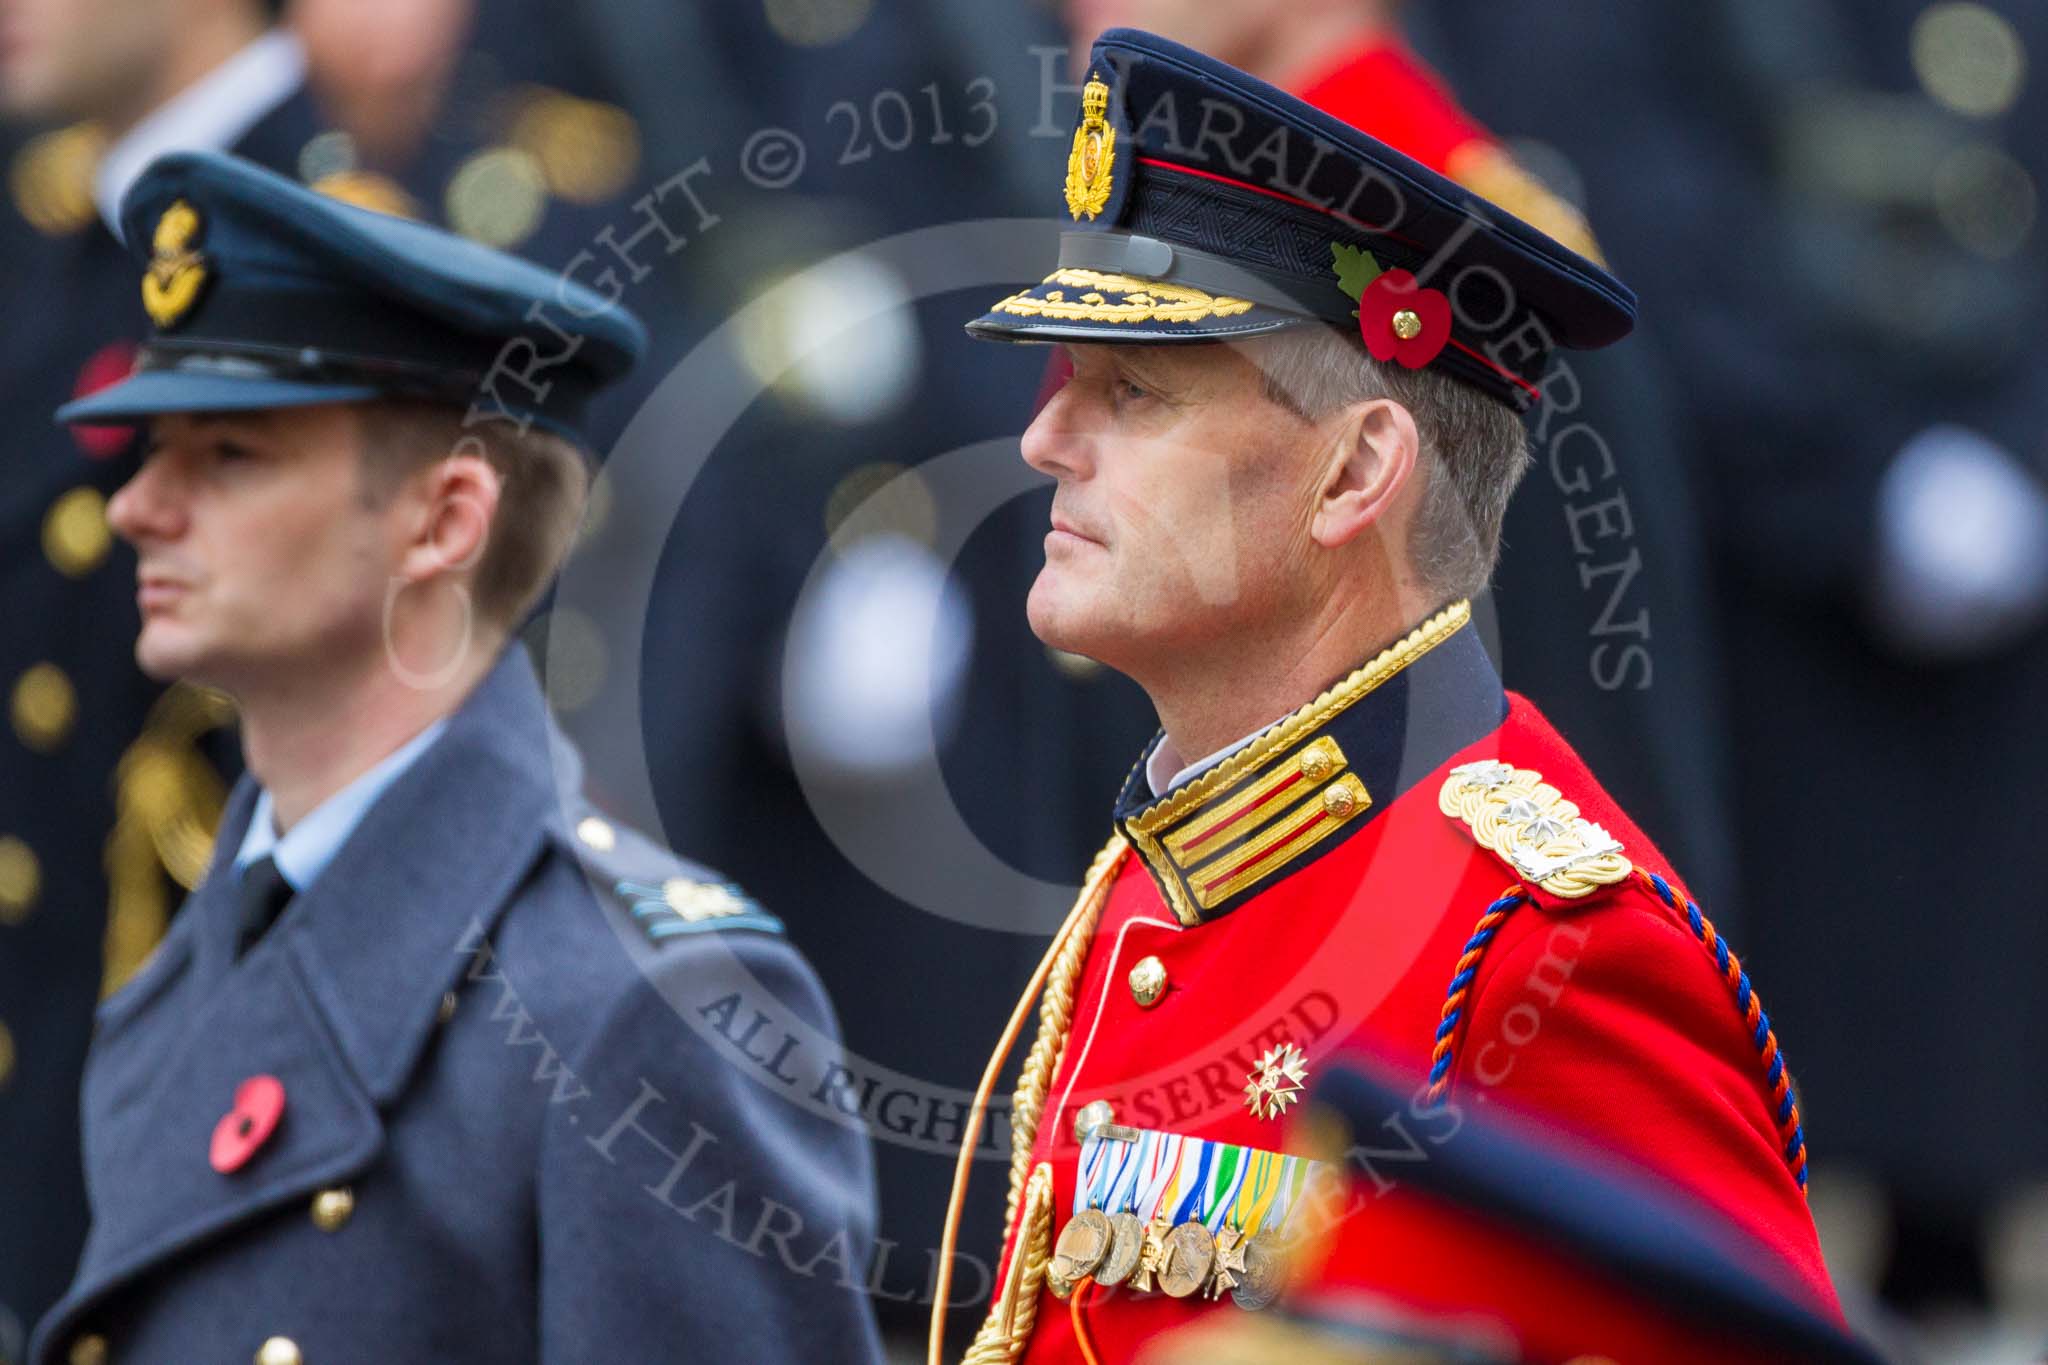 Remembrance Sunday at the Cenotaph 2015: Major‐General Hans van der Louw, equerry to HM The King of the Netherlands, Willem-Alexander. Image #280, 08 November 2015 11:14 Whitehall, London, UK